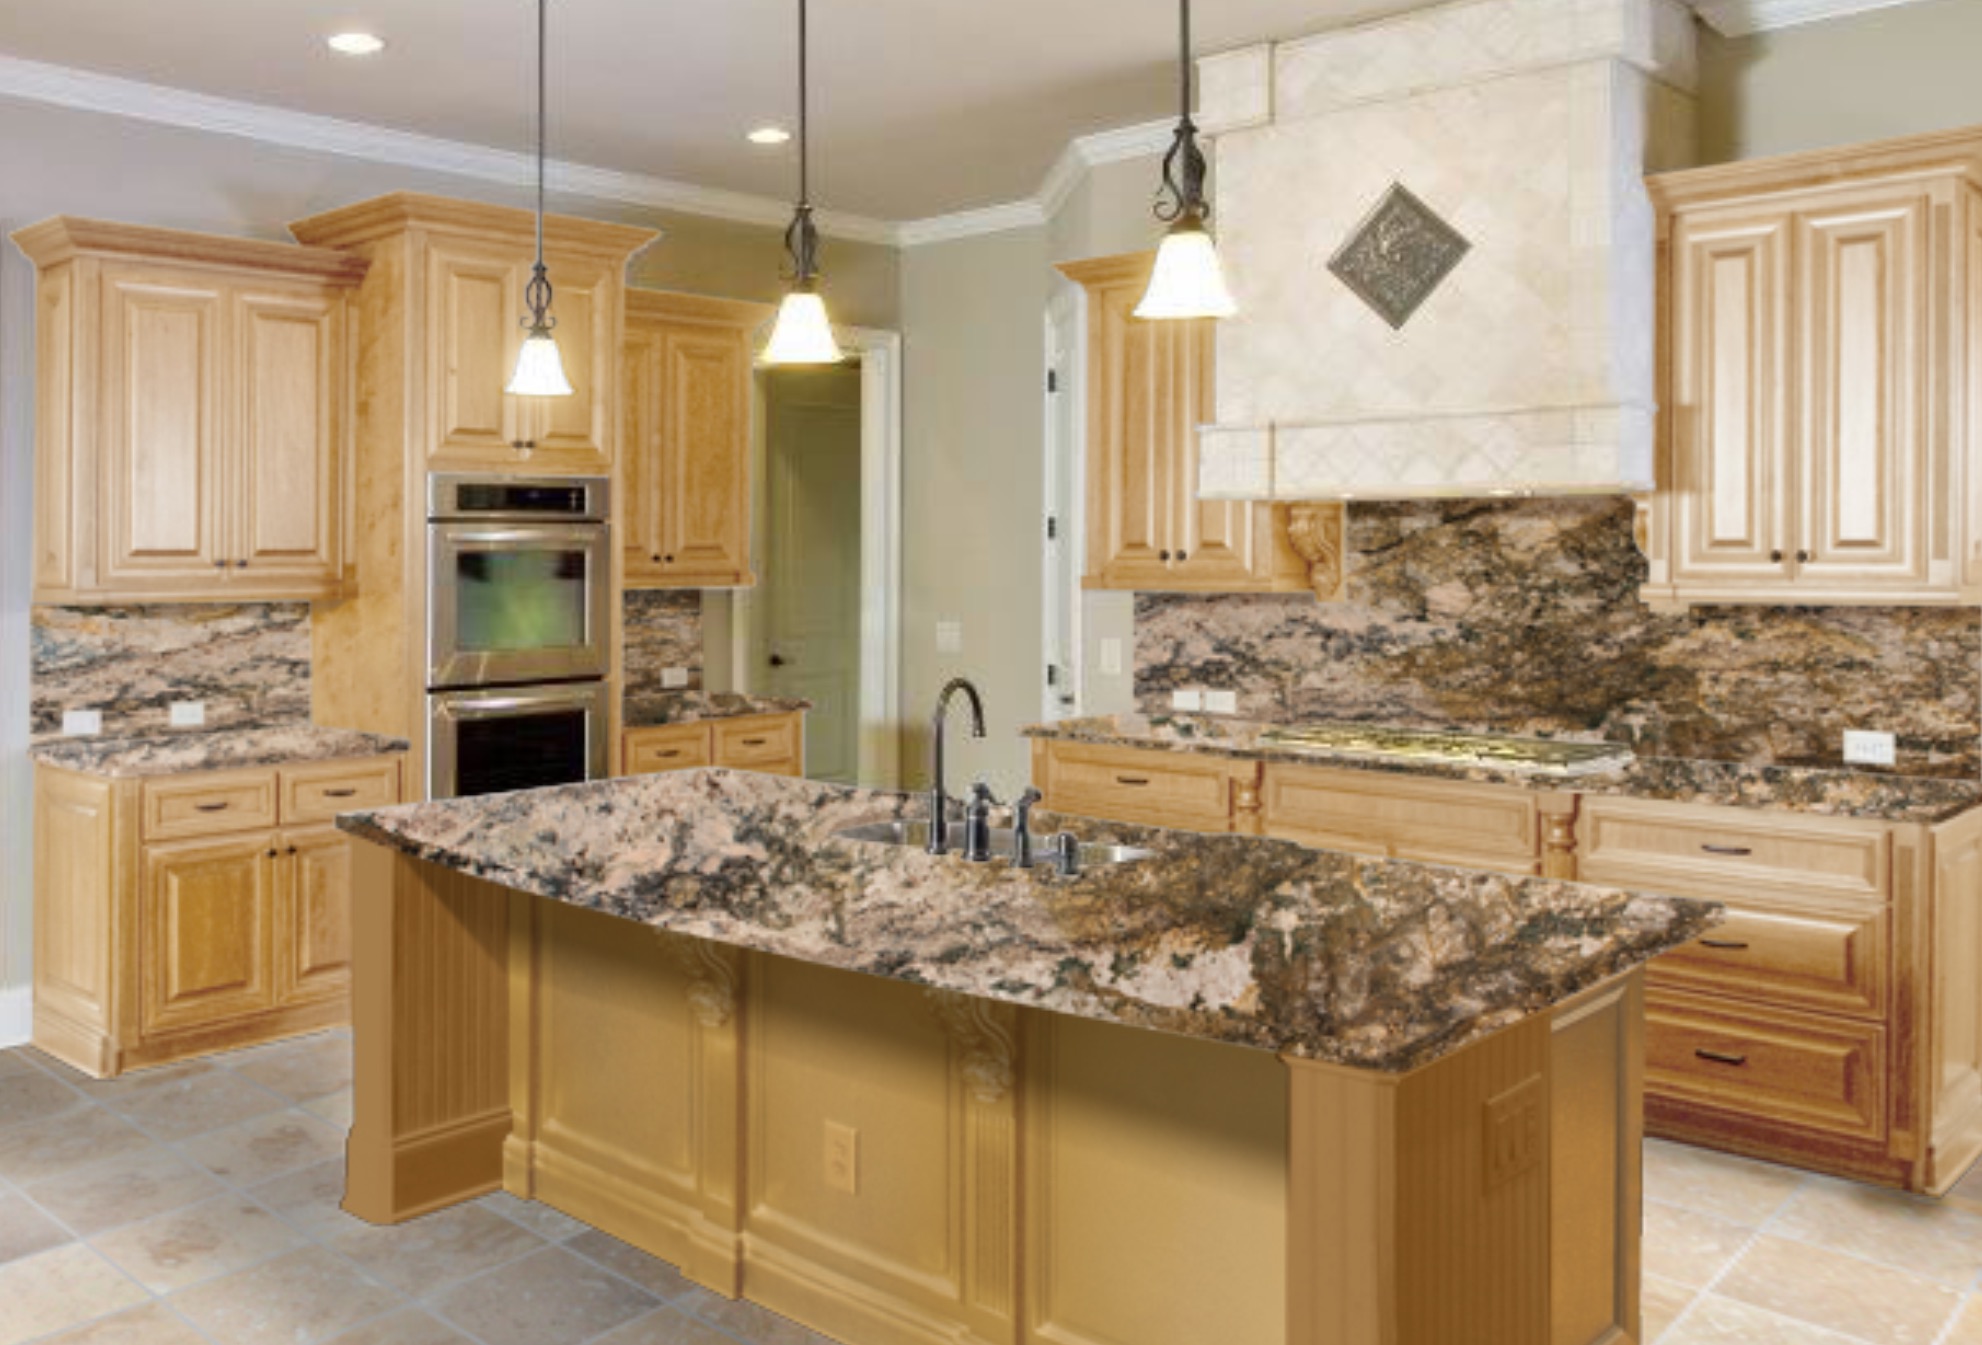 Best Granite For Maple Cabinets, Light Maple Cabinets With White Quartz Countertops